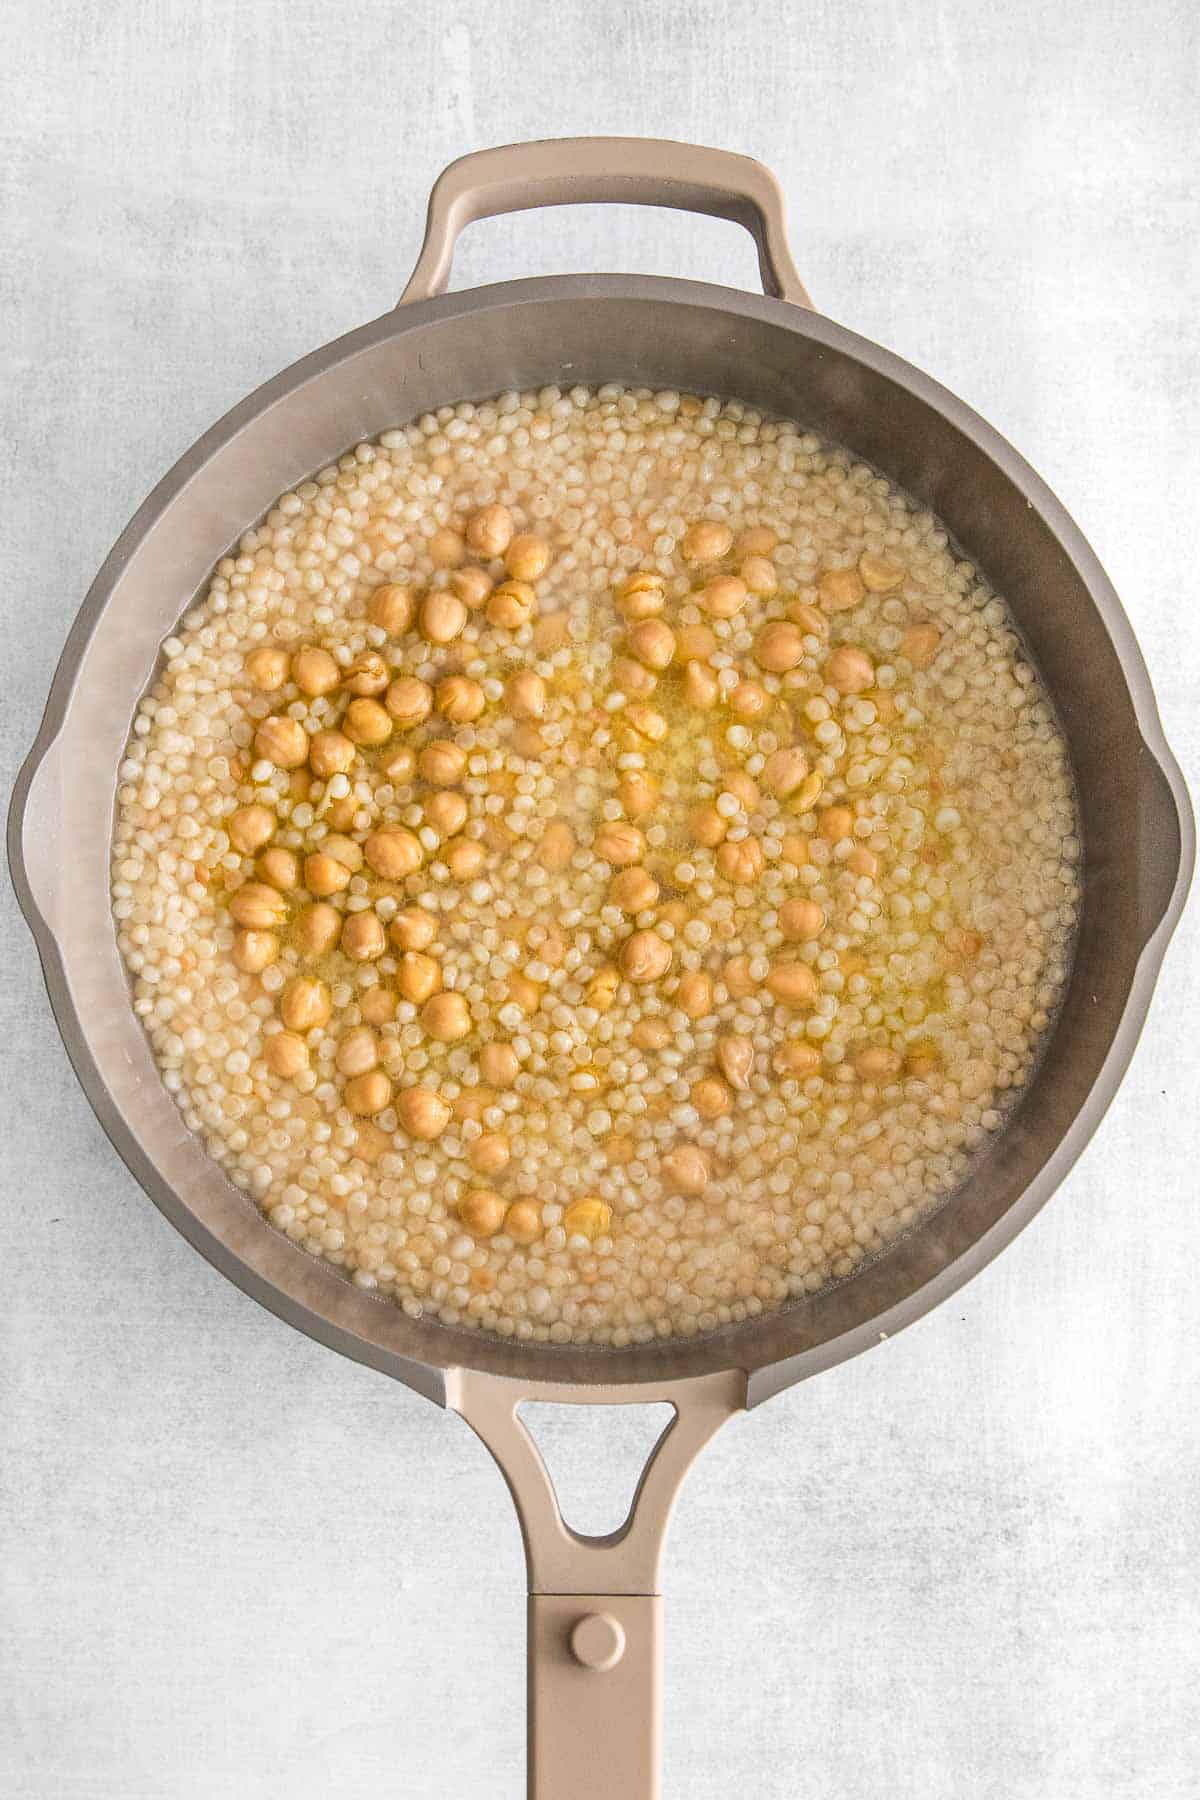 Chic peas and couscous cooking in a large skillet.